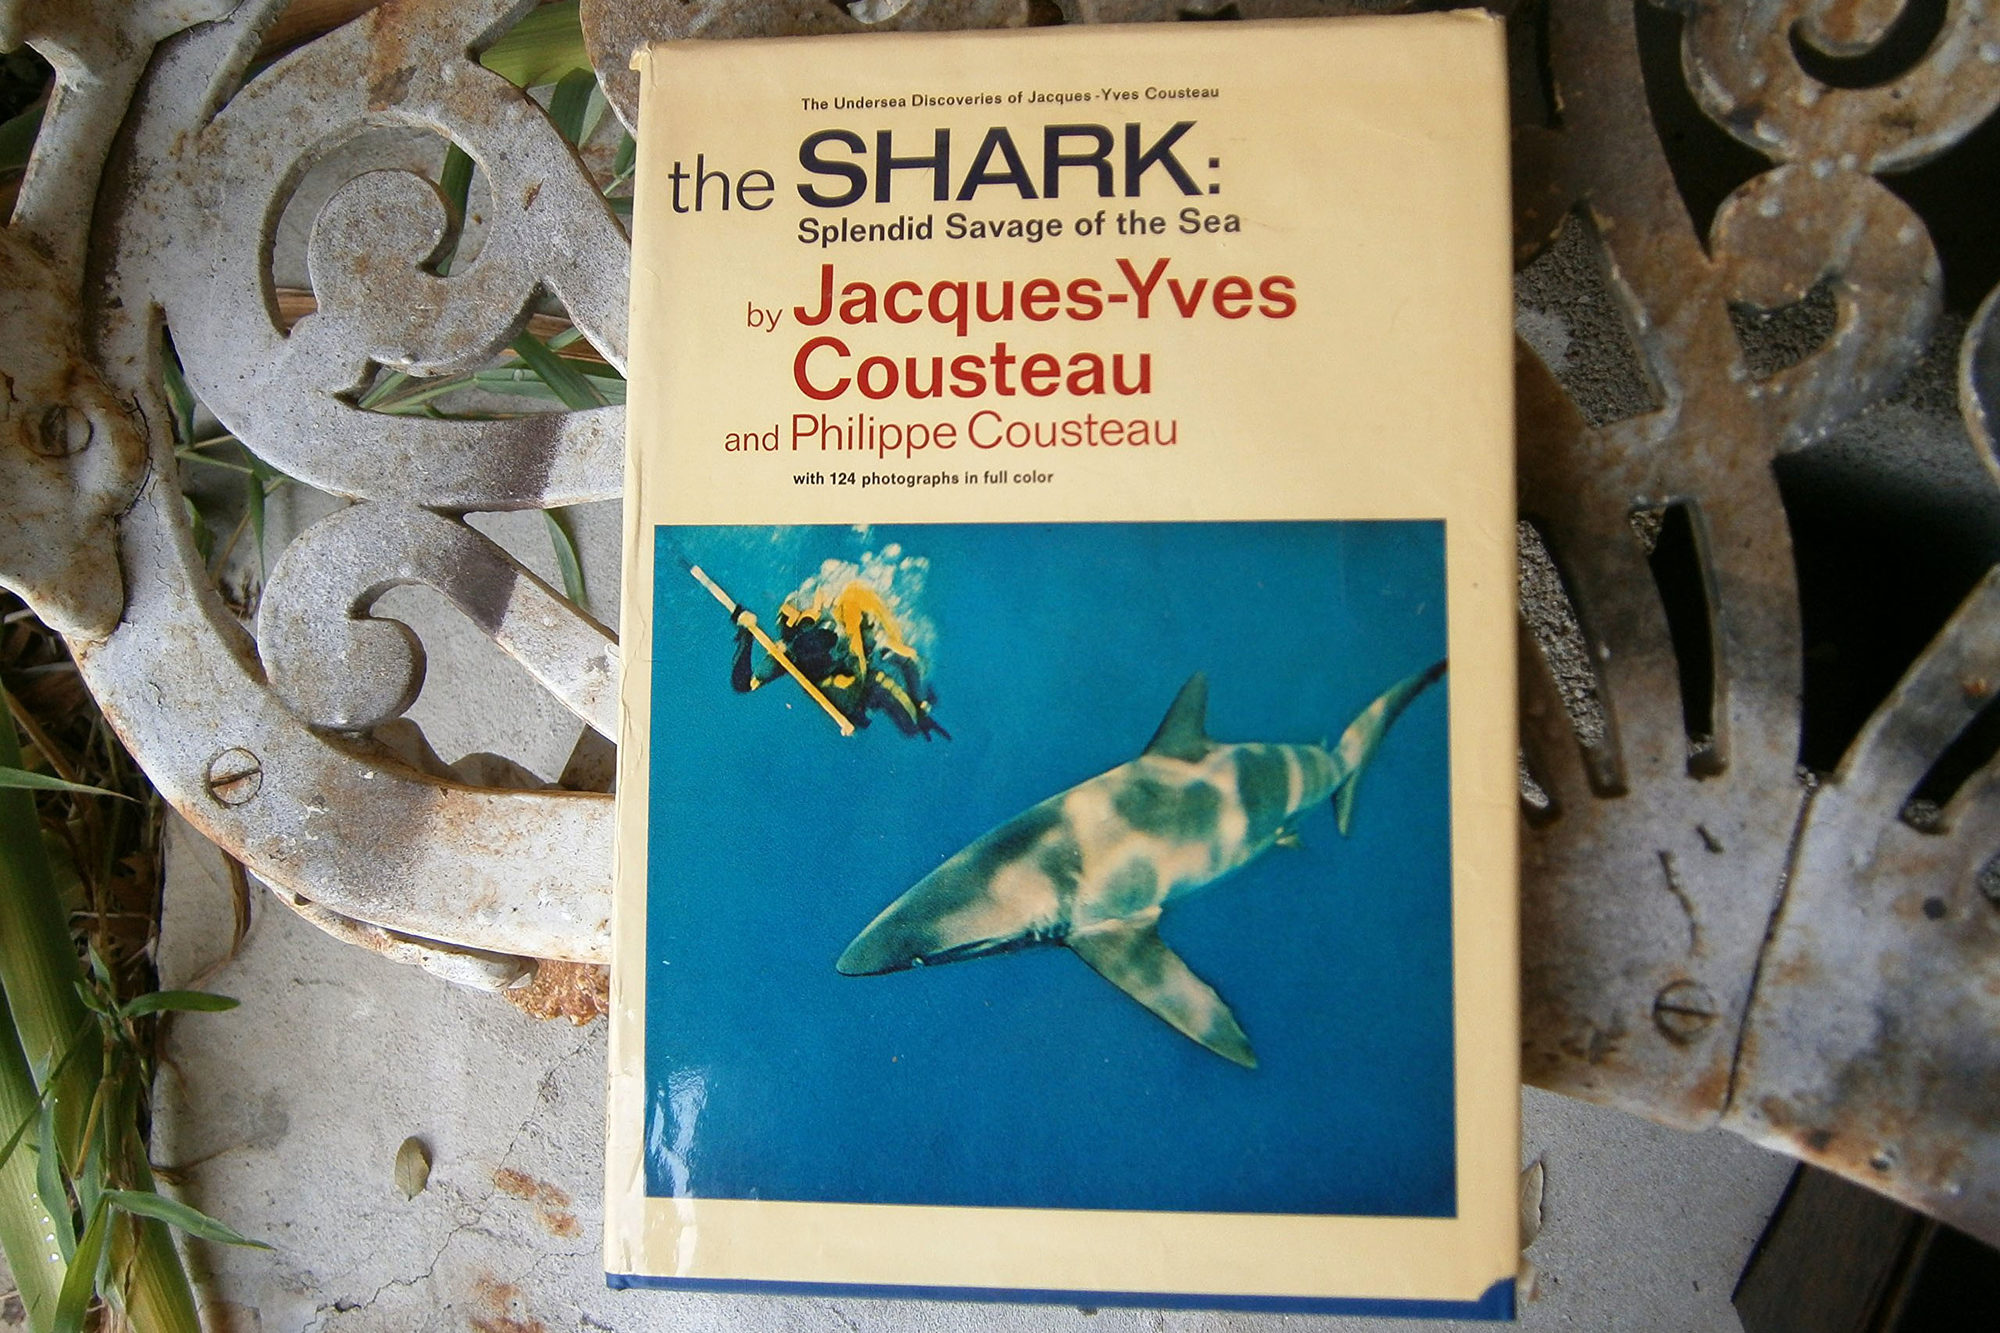 We Re Going To Need A Bigger Watch A Sharktastic Guide To